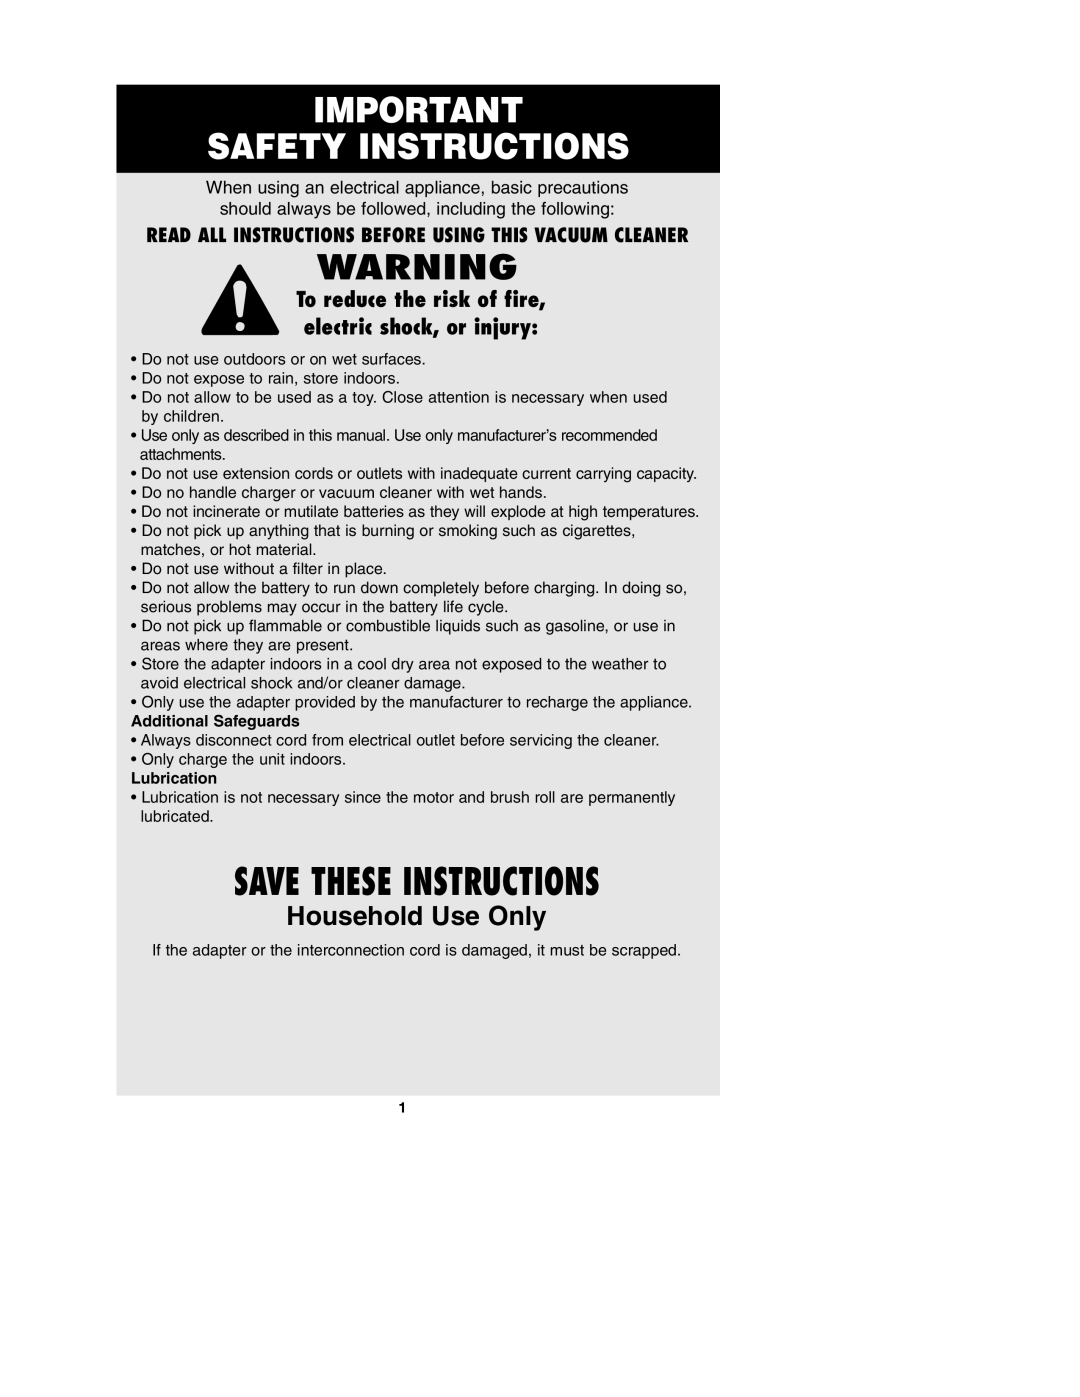 Oreck MODEL AV-701B Safety Instructions, Save These Instructions, Household Use Only, Additional Safeguards, Lubrication 